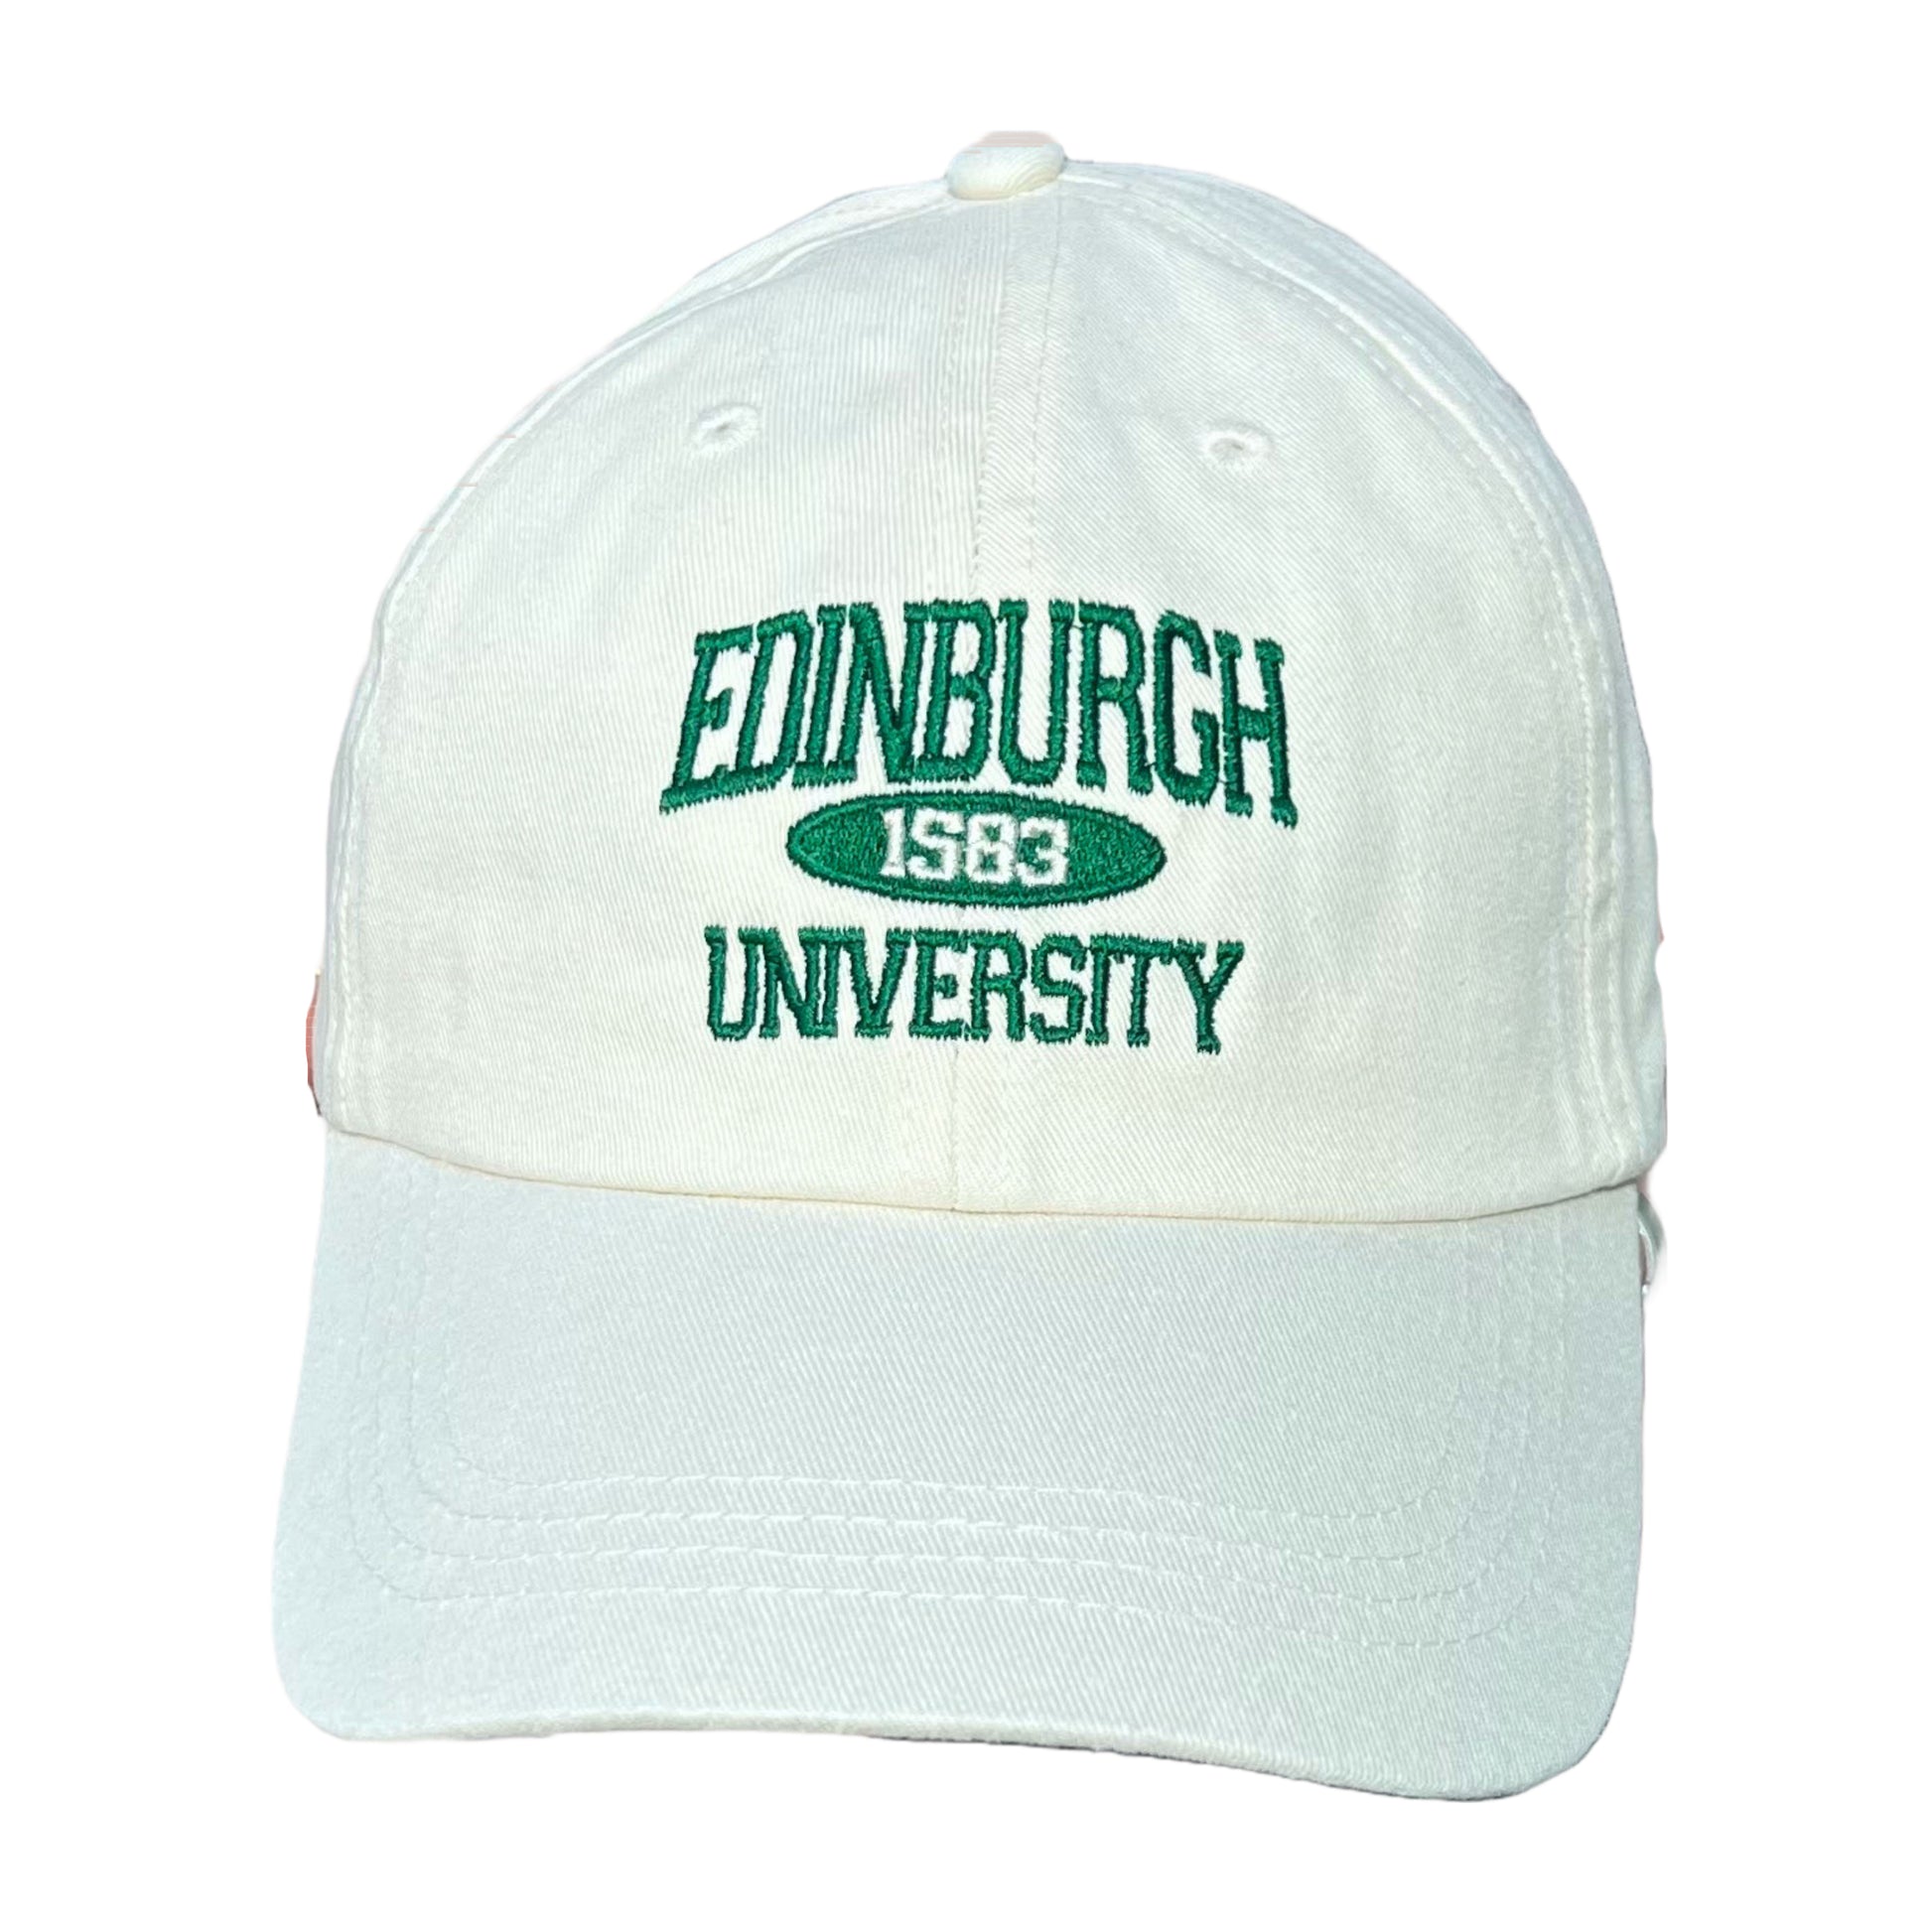 Front view of cream baseball cap with green embriodered text stating 'EDINBURGH UNIVERSITY'.